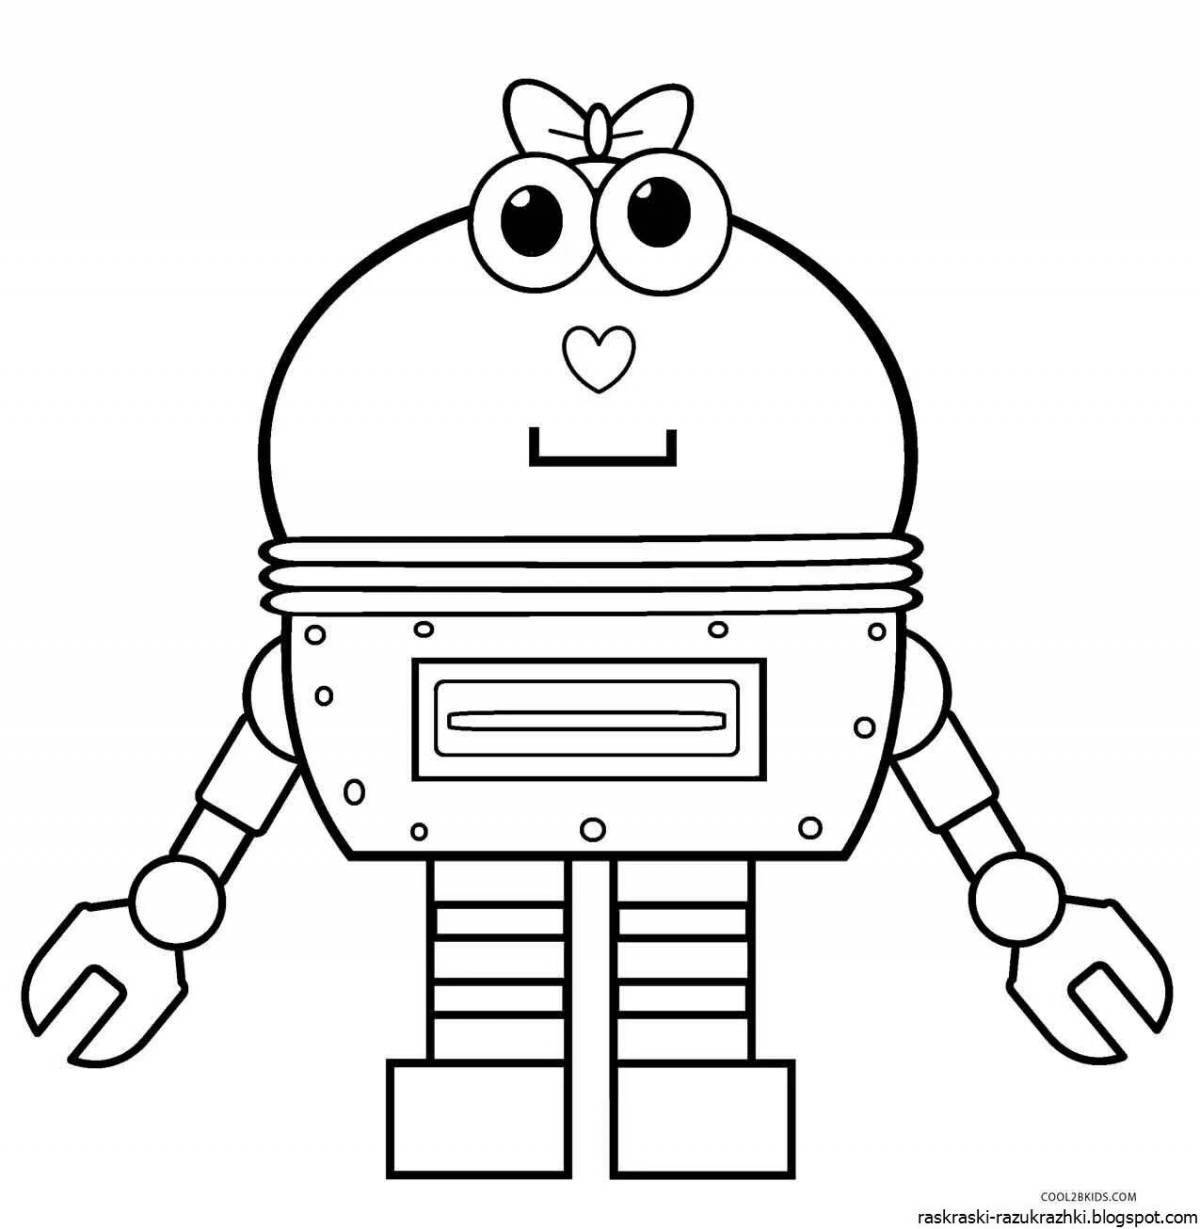 Robots for children 5 7 years old #6